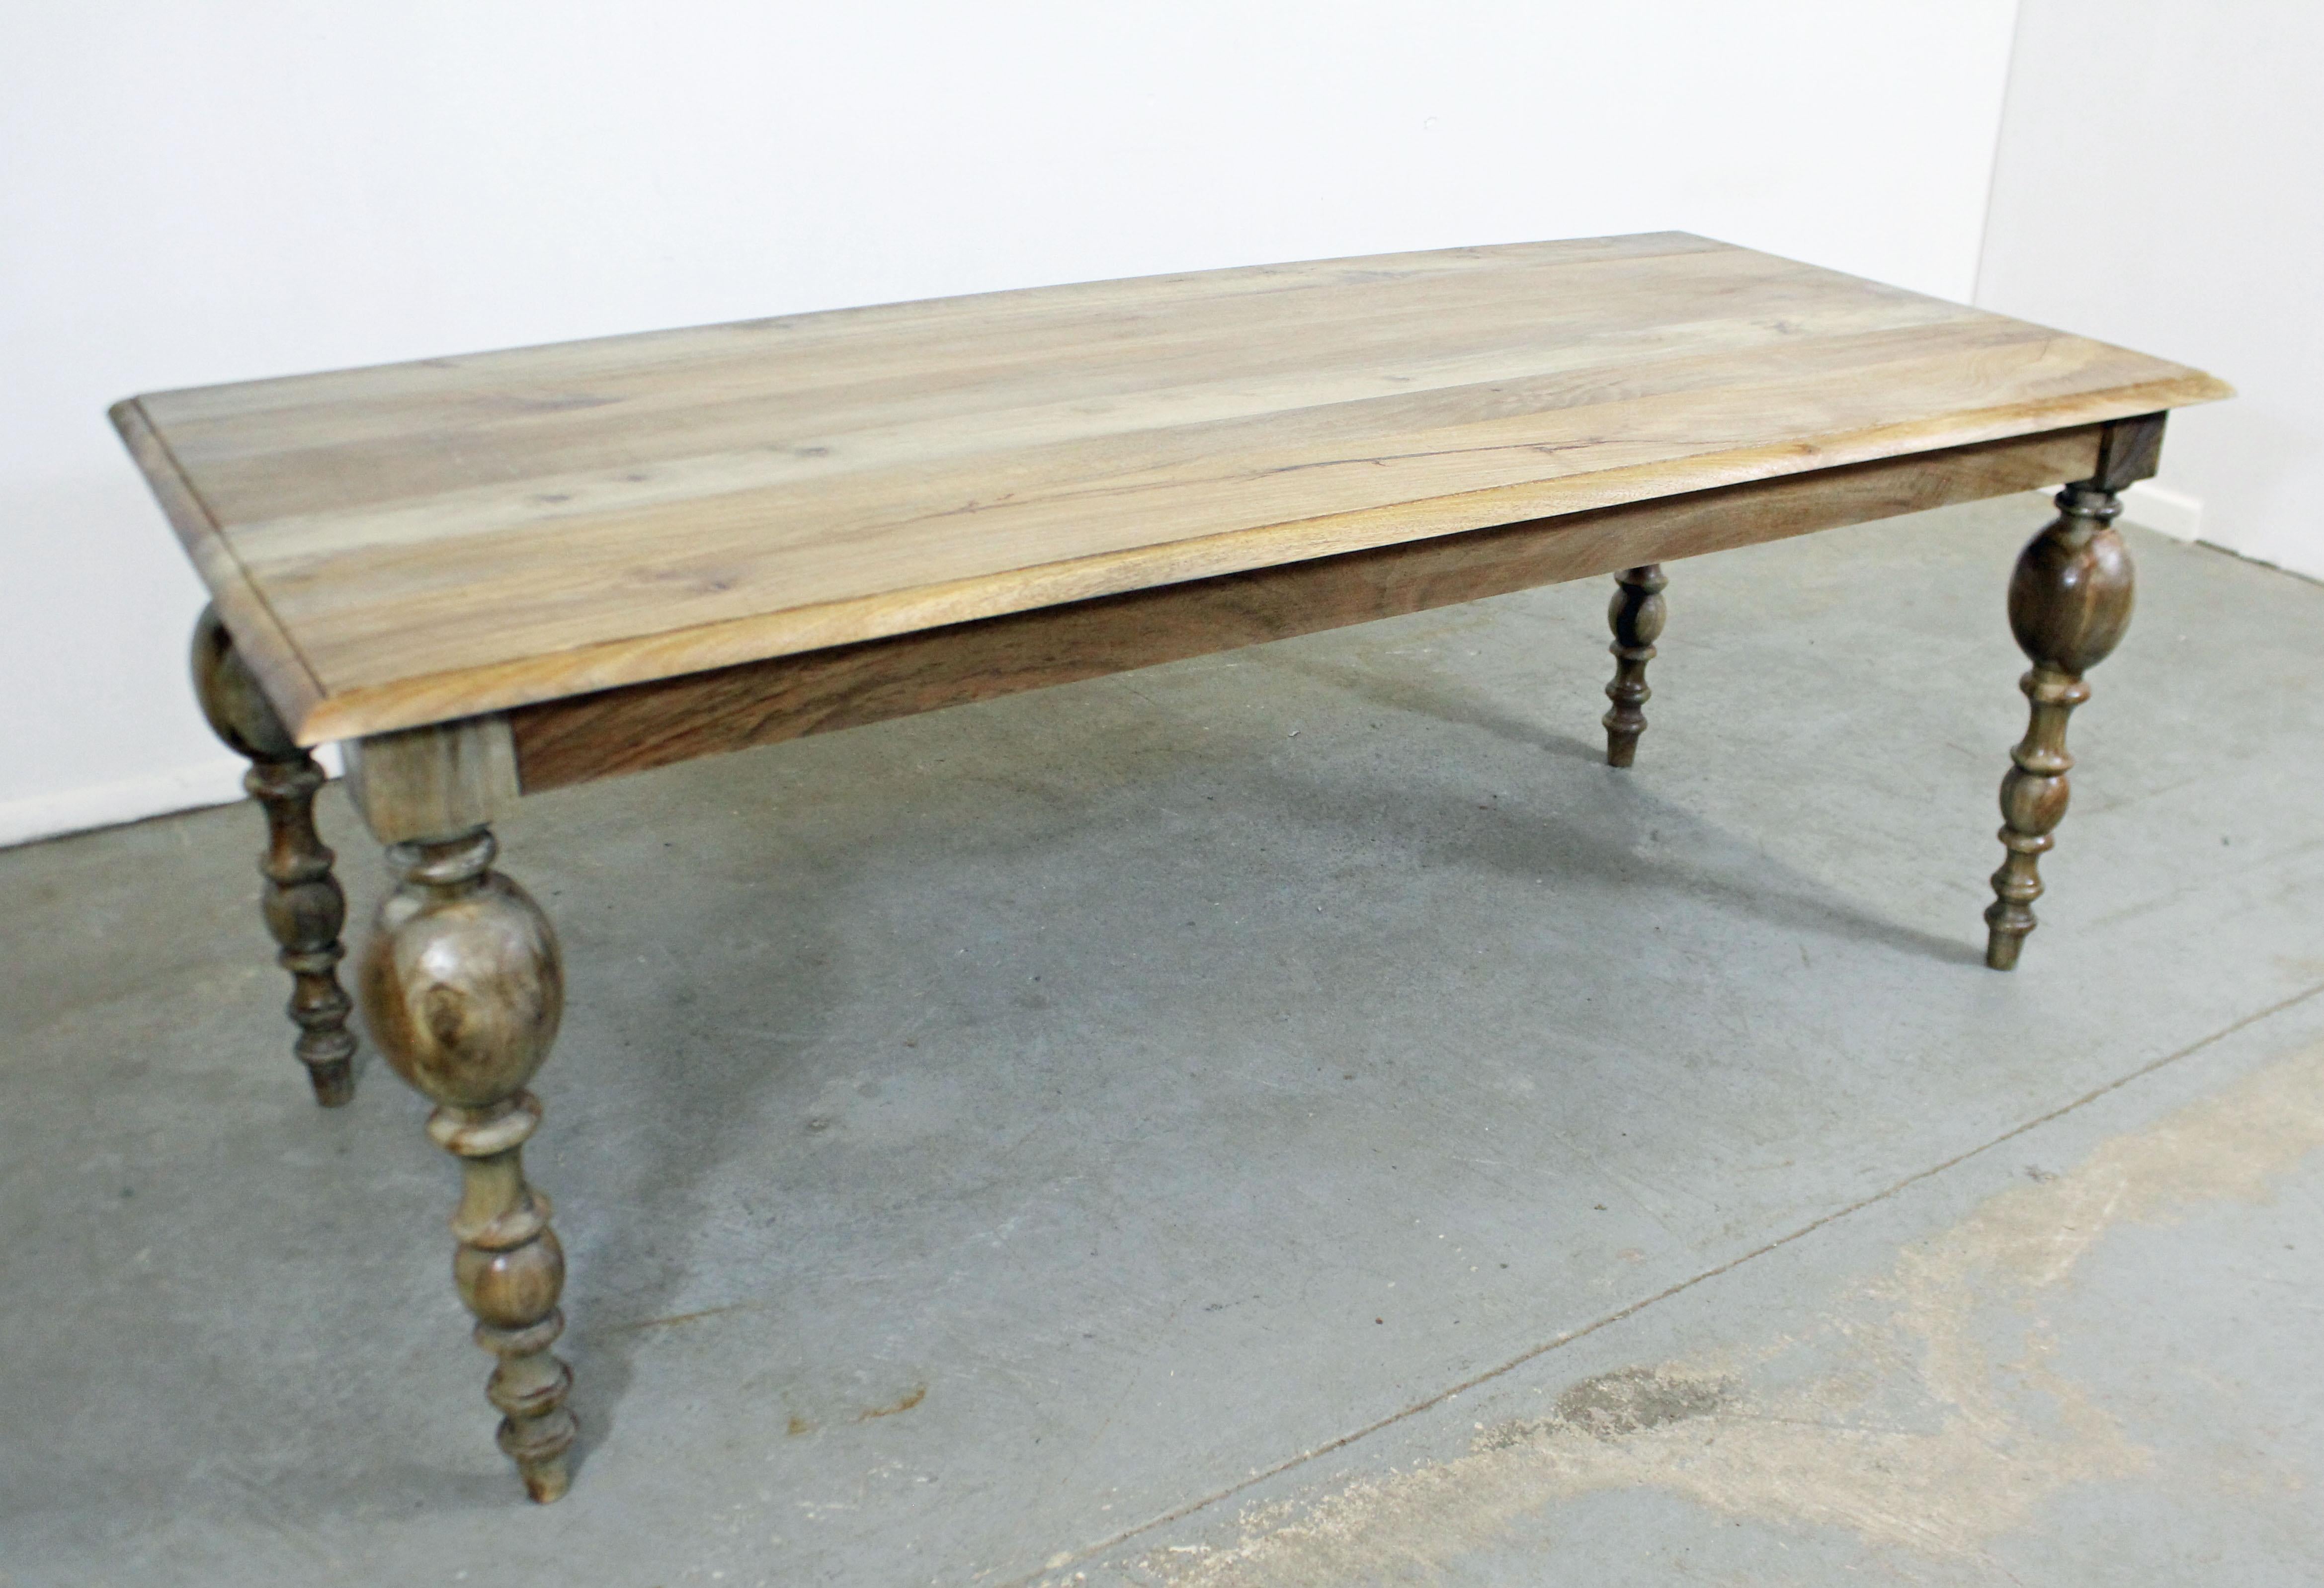 What a find. Offered is a French country dining table. It has a great look to it with carved legs and a primitive/ rustic finish. This piece has never been in a home and is a floor model. Each table has a rustic finish and will have slightly